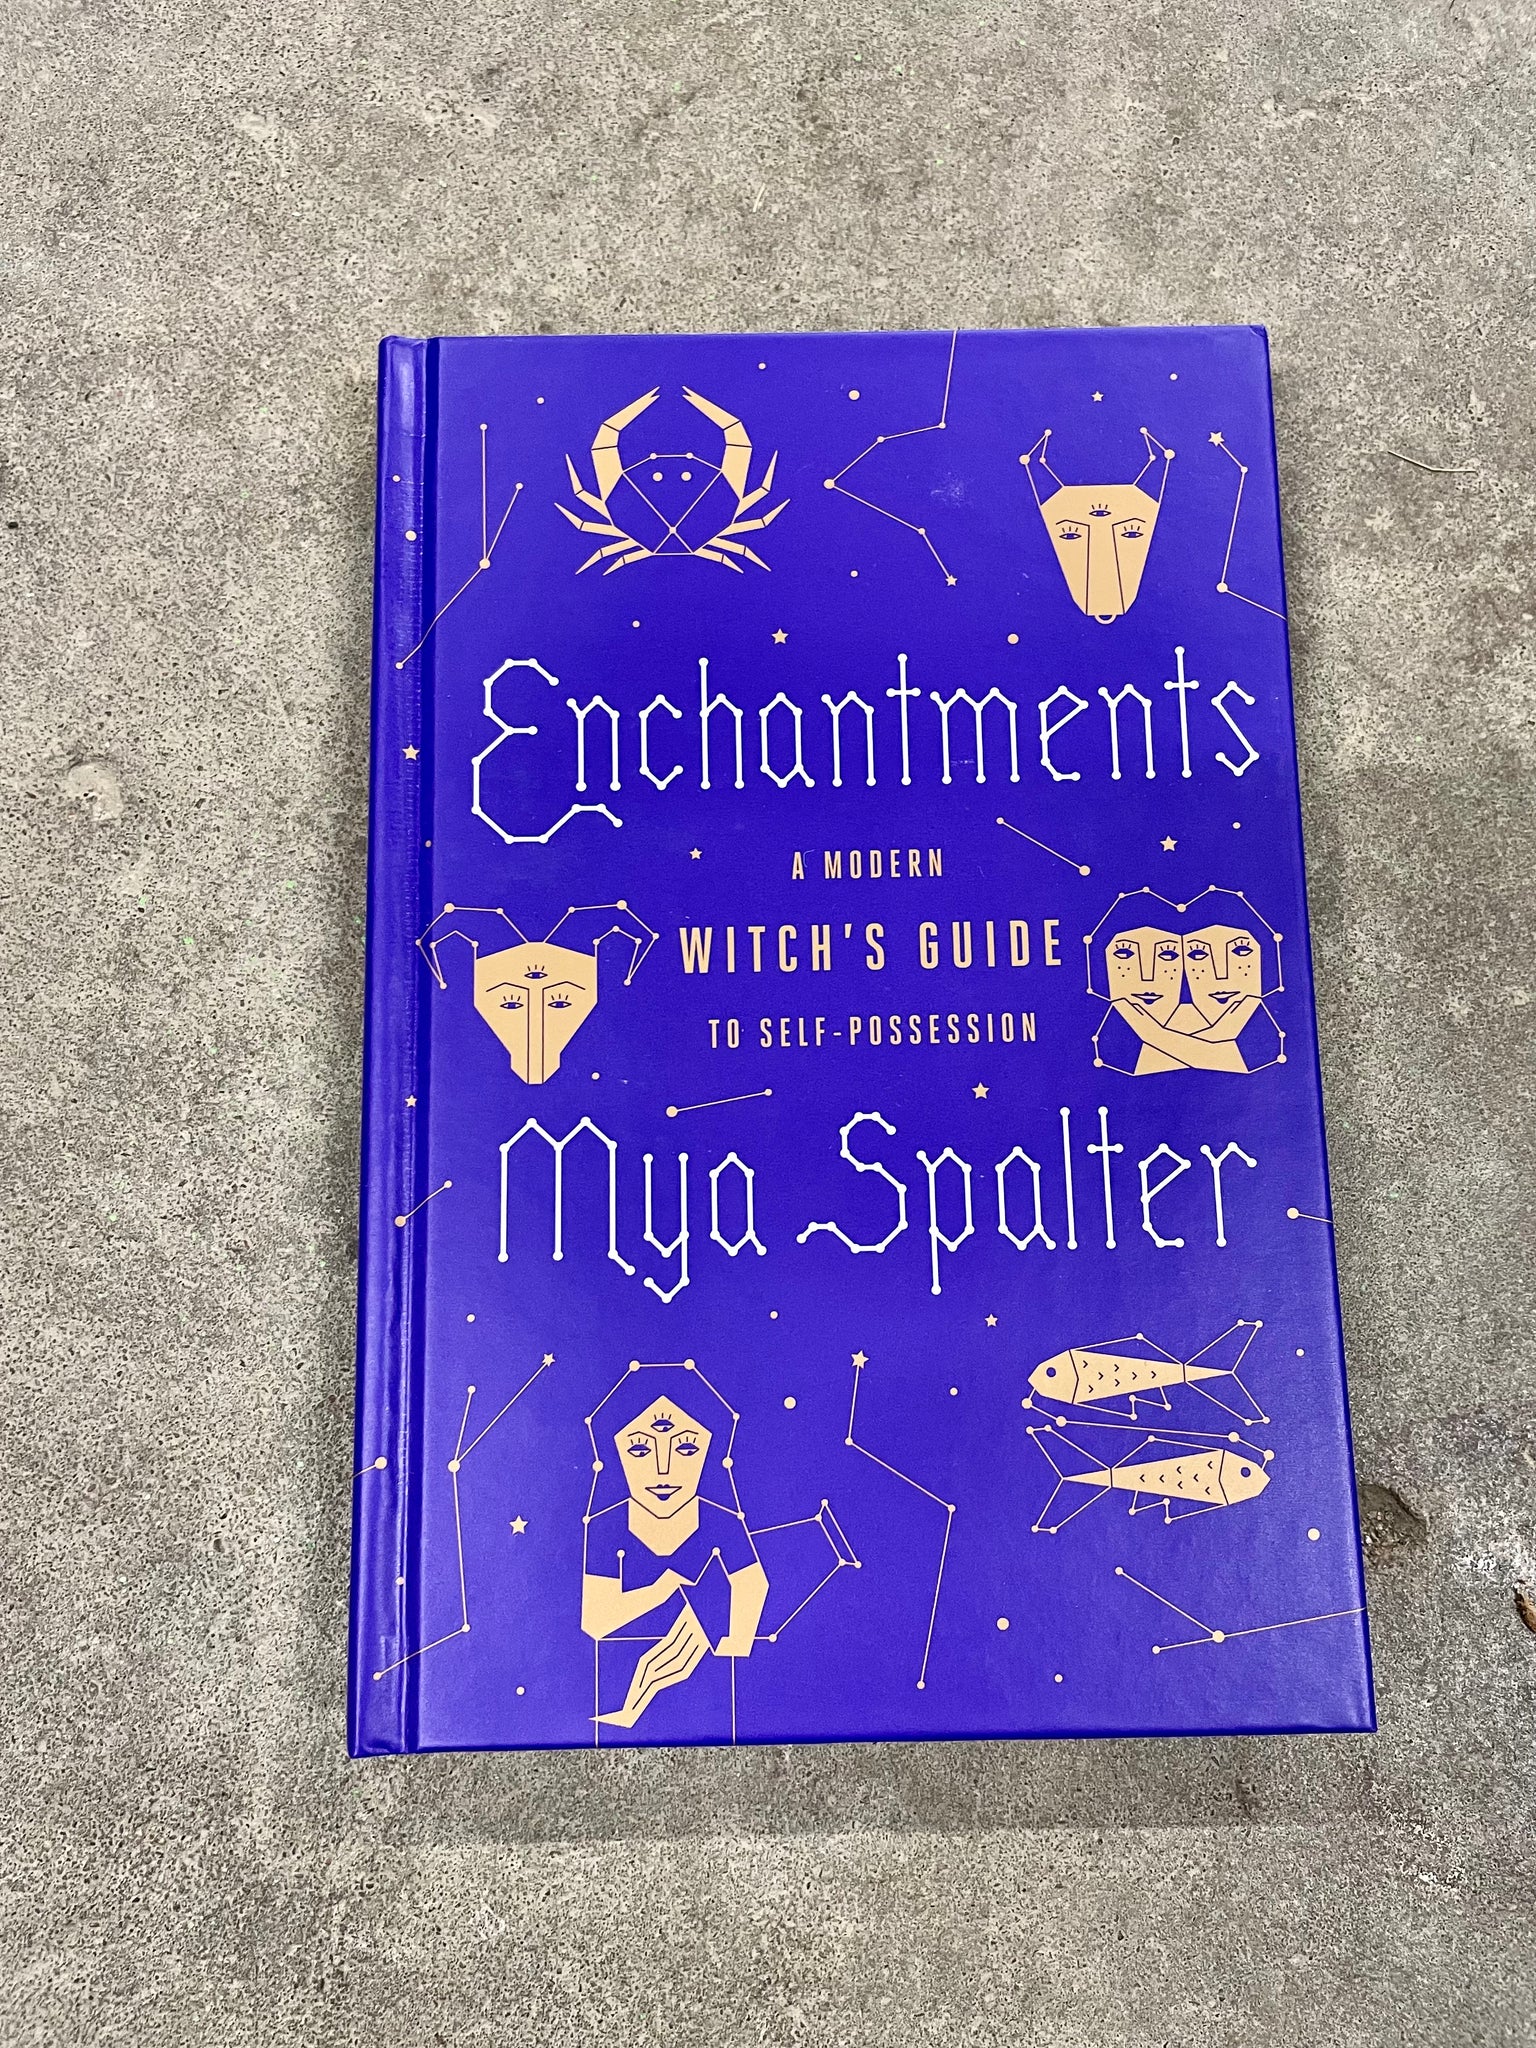 Enchantments - A Modern Witch's Guide to Self-Possession